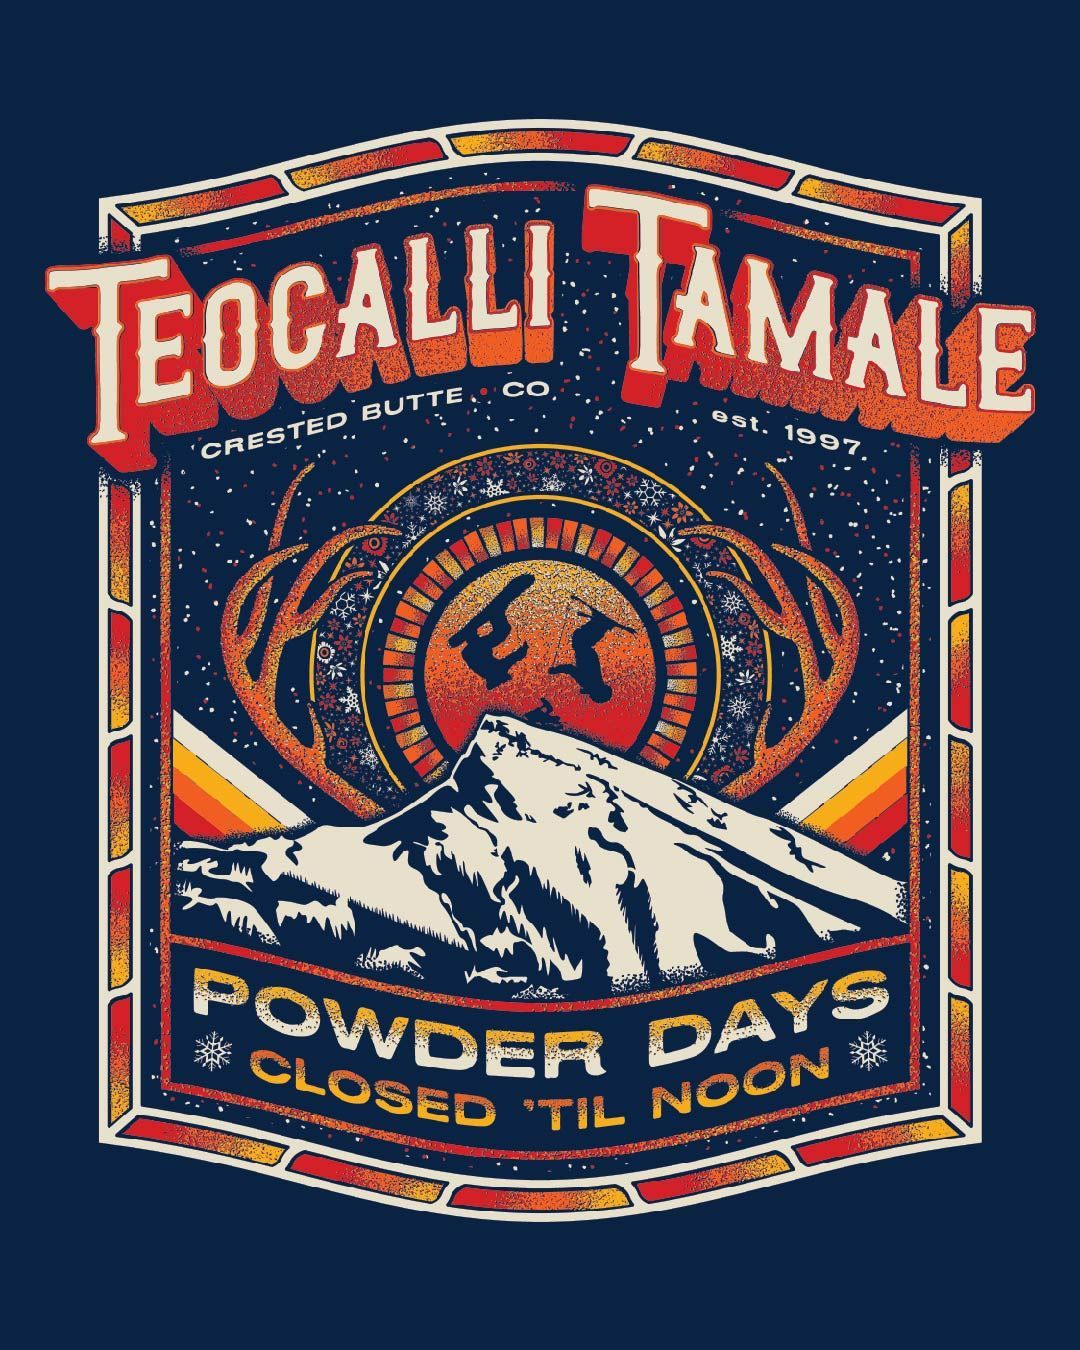 teocalli tamale crested butte co. powder days closed til noon